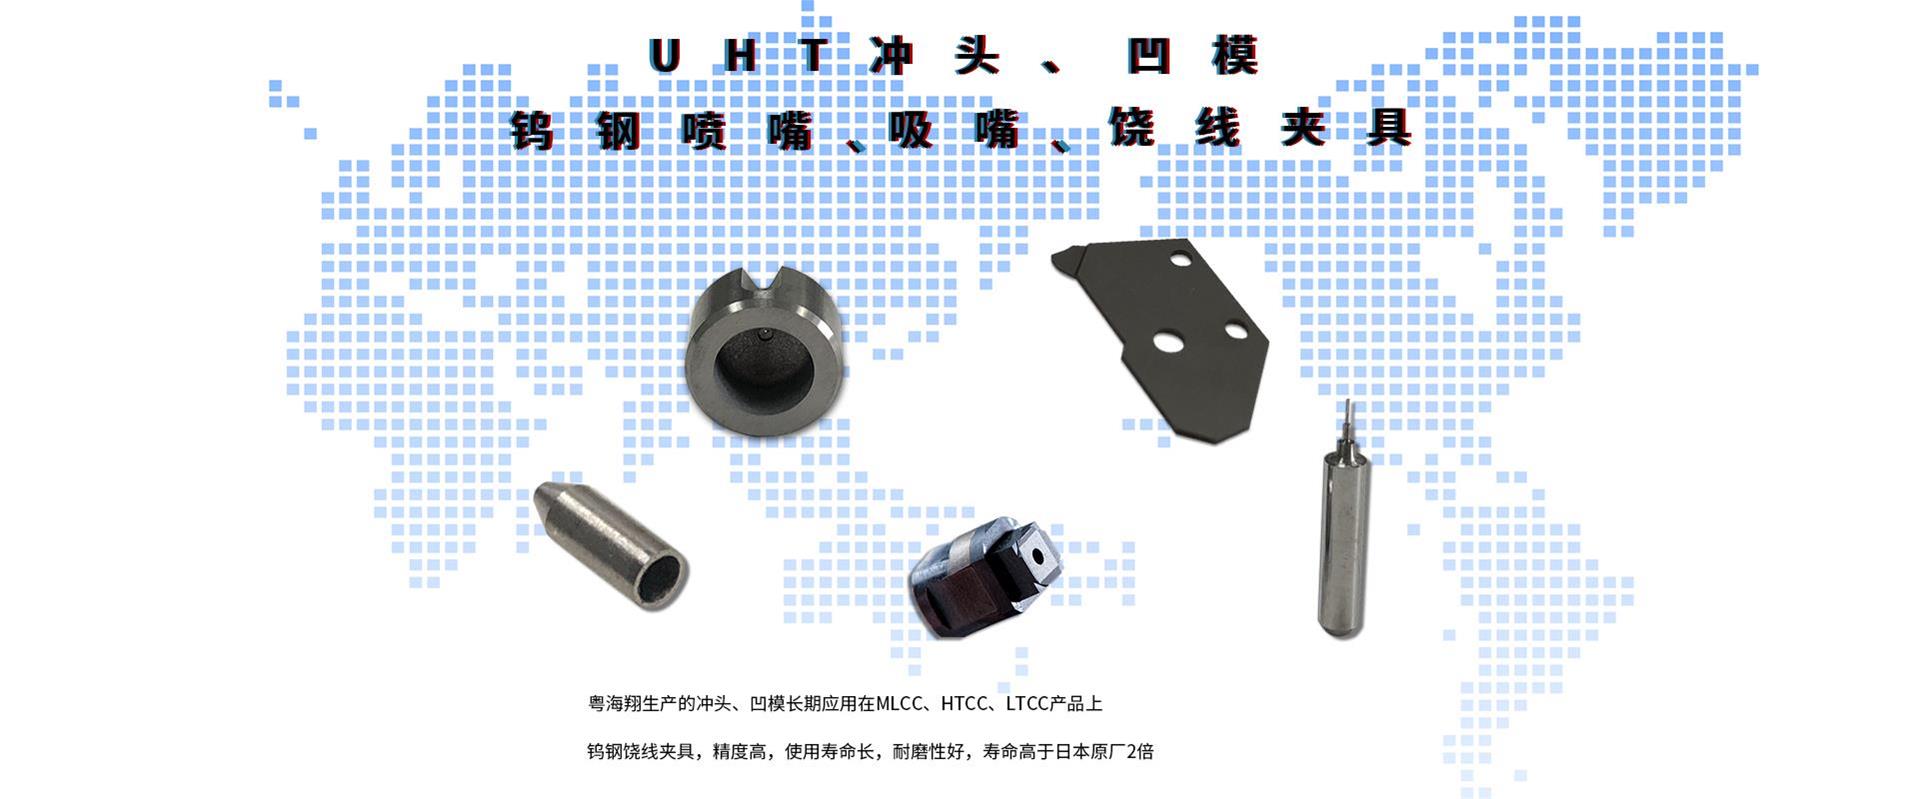 YHX | Ultra-micro hole processing, ultra-thin tungsten steel blade, UHT punching needle, die, NCC adsorption plate, tungsten steel nozzle, winding fixture, suction nozzle manufacturer